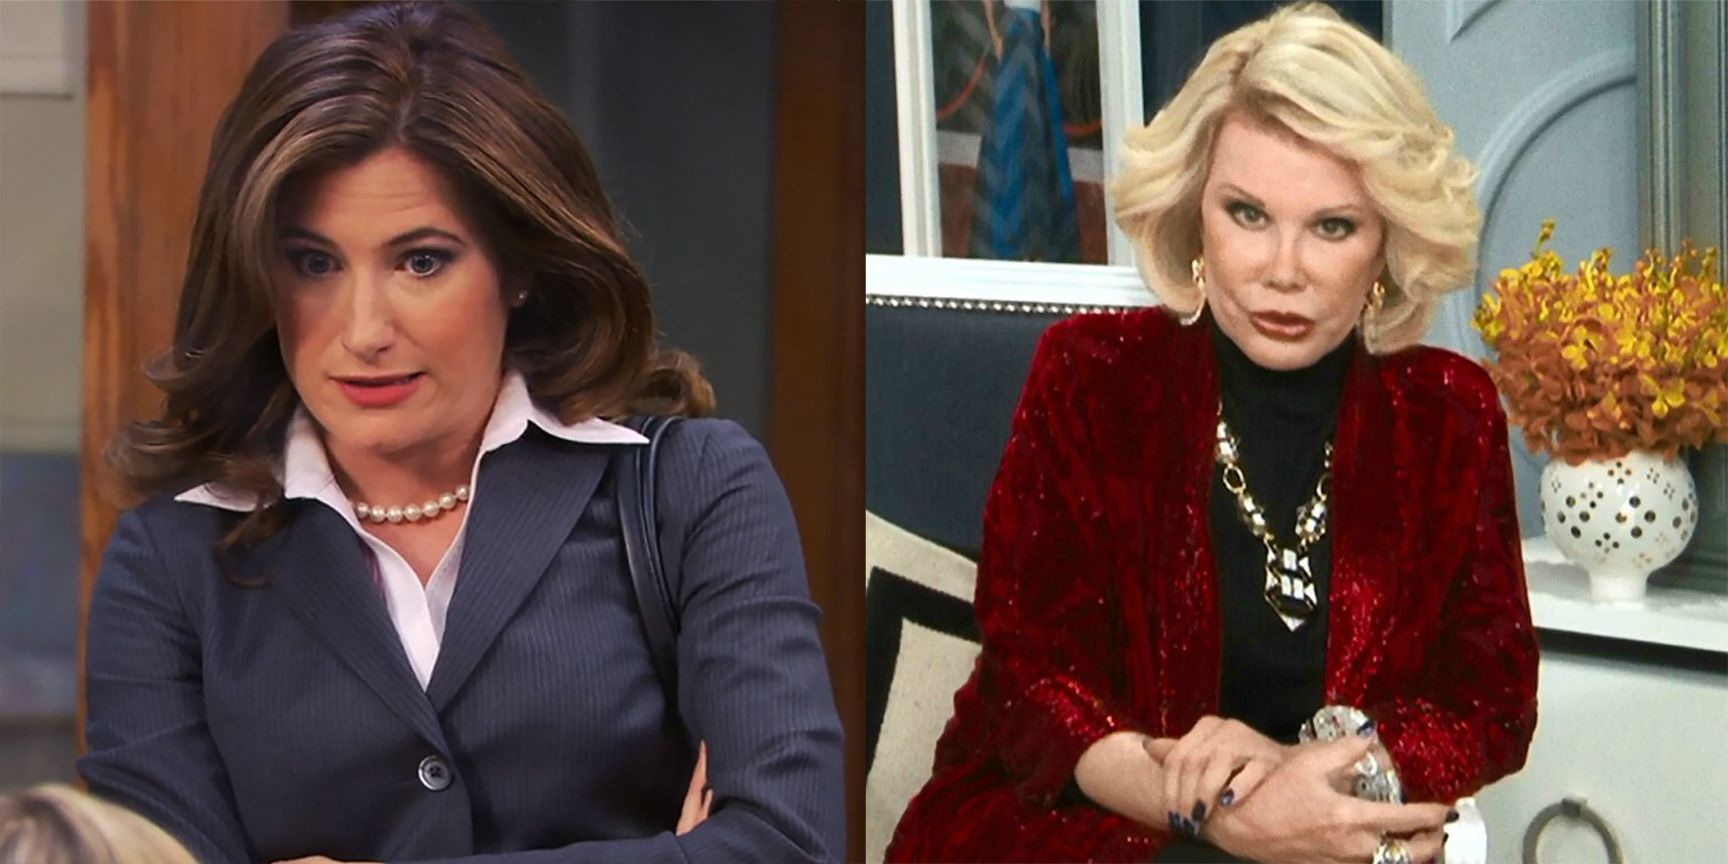 Kathryn Hahns Joan Rivers Show Is No Longer Happening